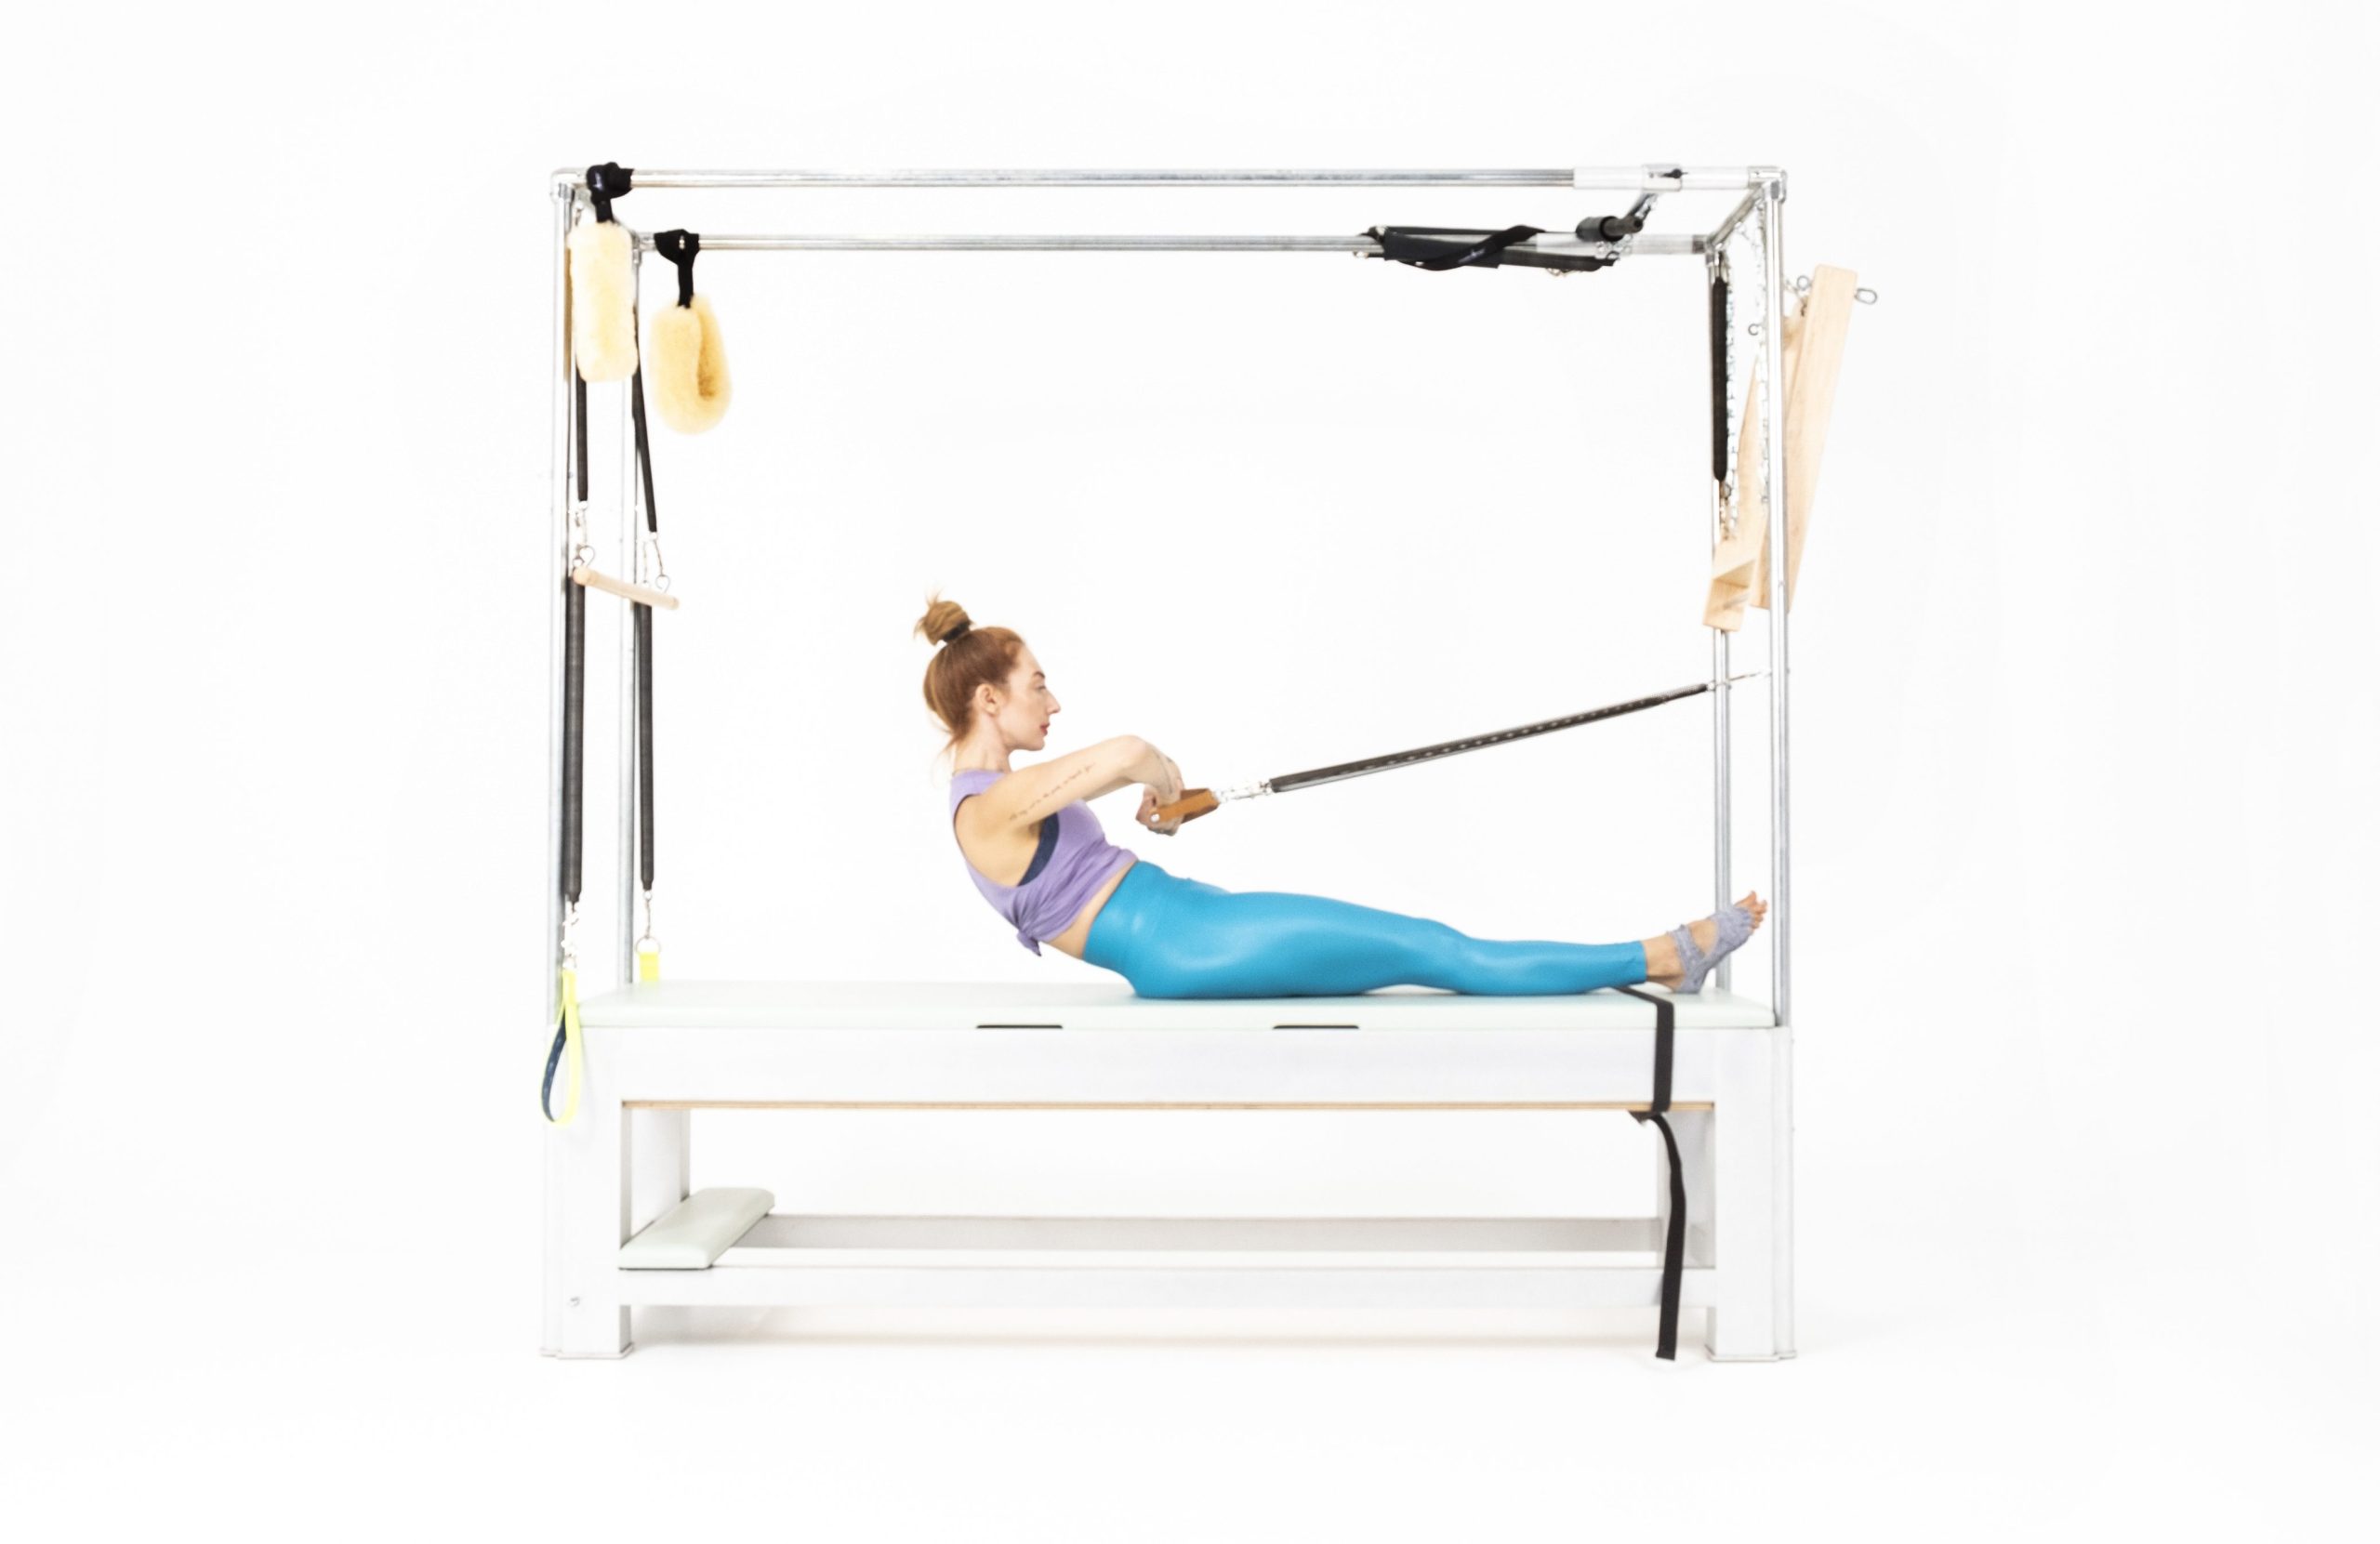 Rowing 1 Into the Sternum with Arm Springs on the Cadillac or Tower Online Pilates Classes